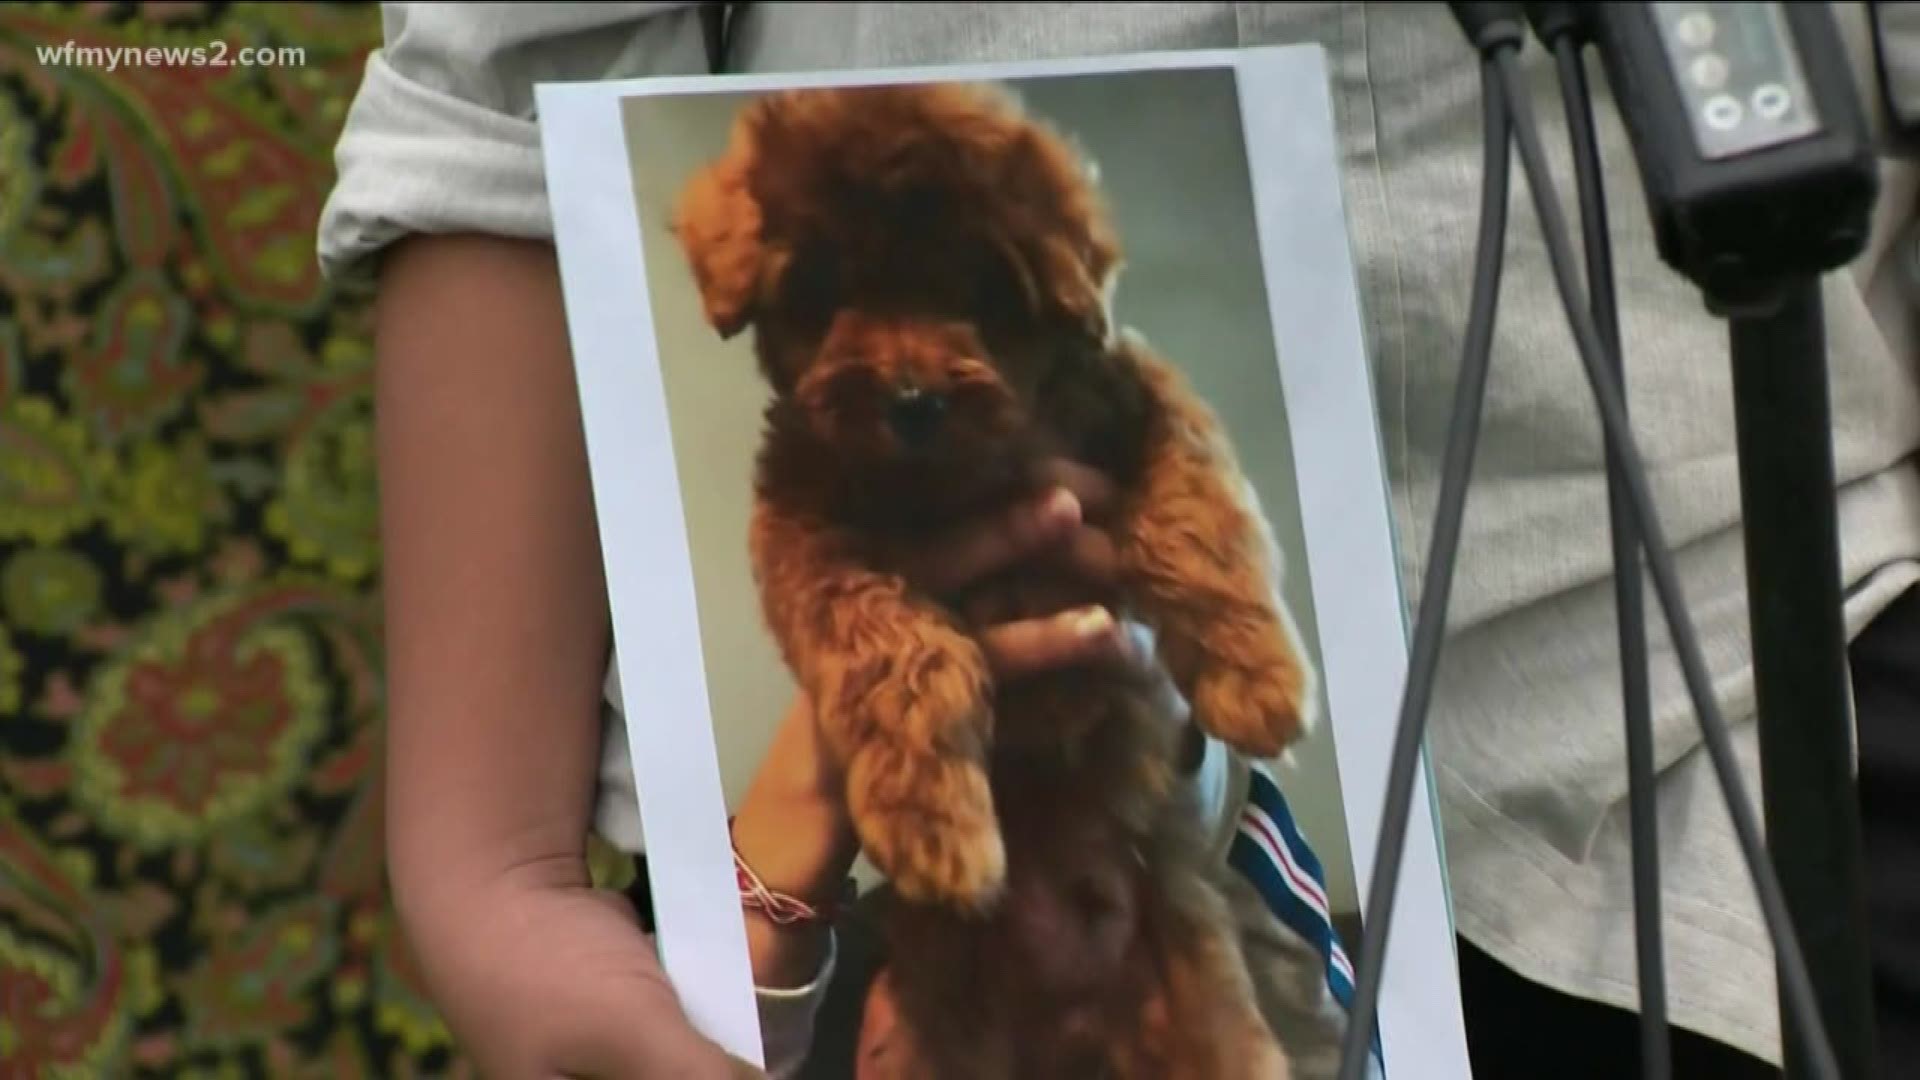 Attorneys filed a lawsuit against a family claiming they were illegally breeding, dying, and selling sick puppies.